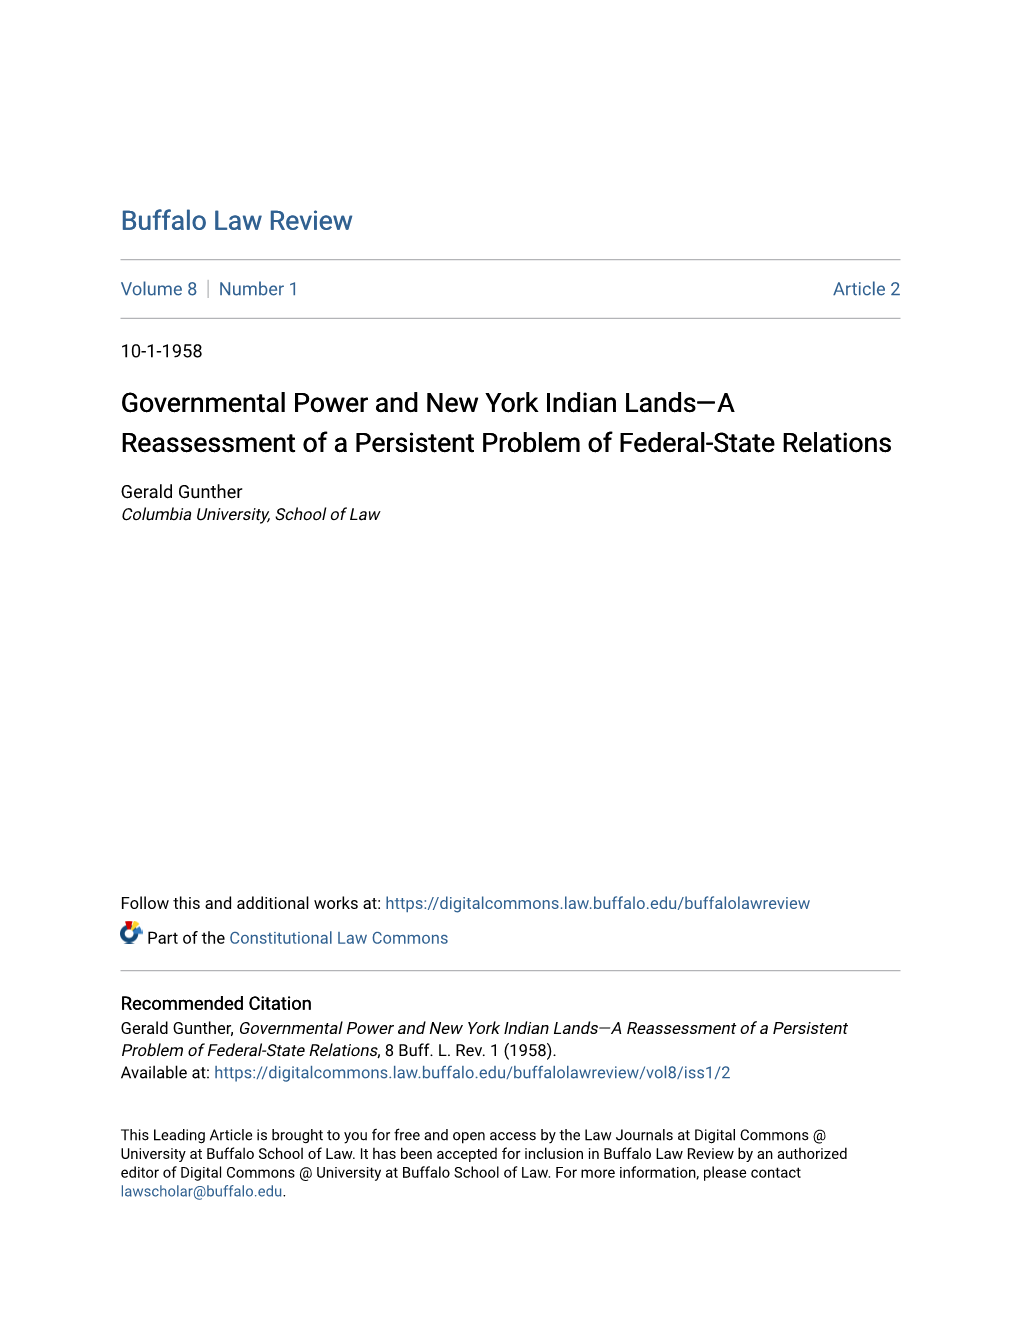 Governmental Power and New York Indian Landsâ•Fla Reassessment Of